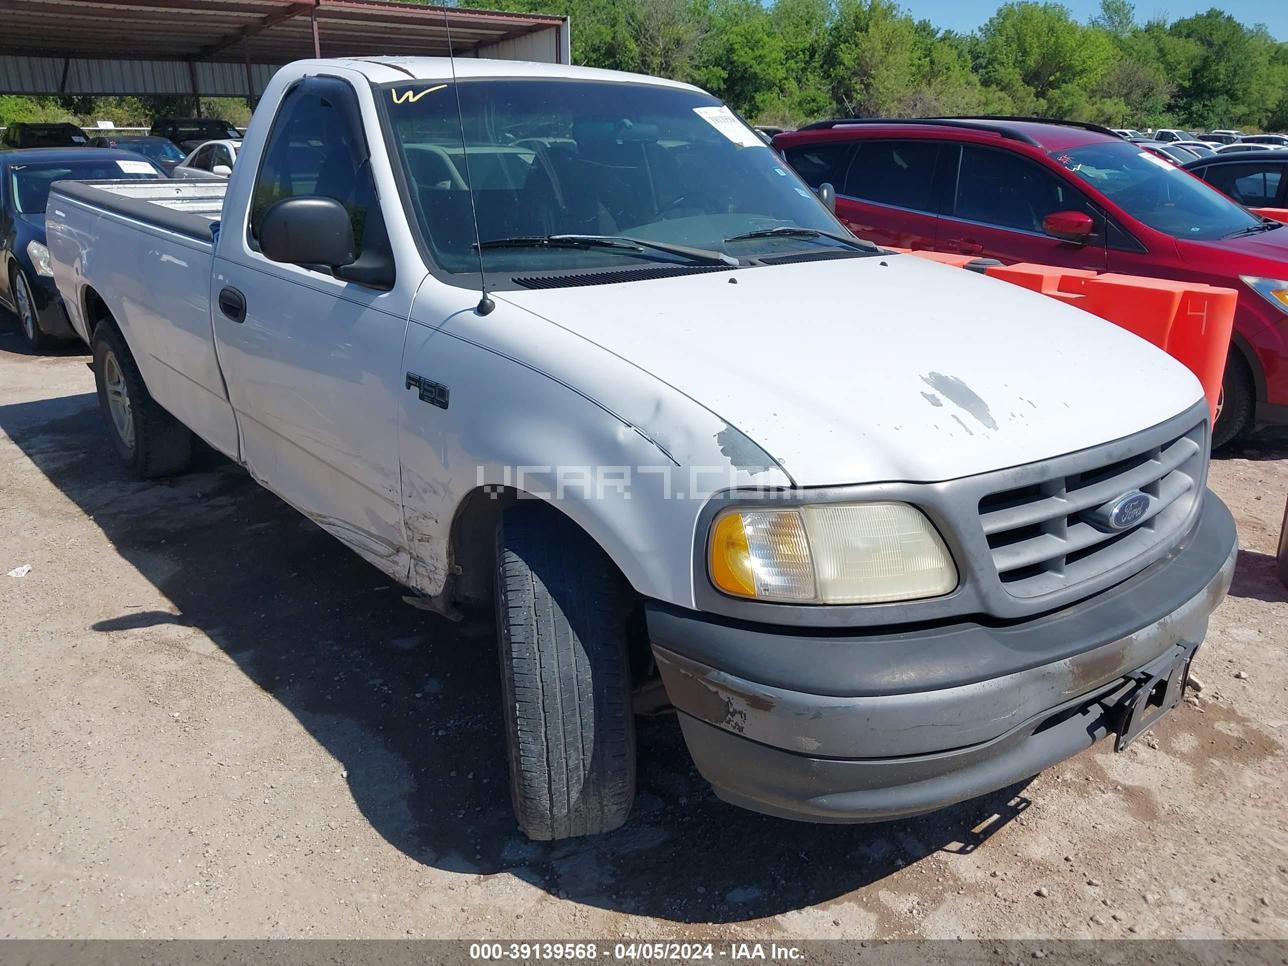 VIN: 1FTZF17291KF82544 - ford f-150